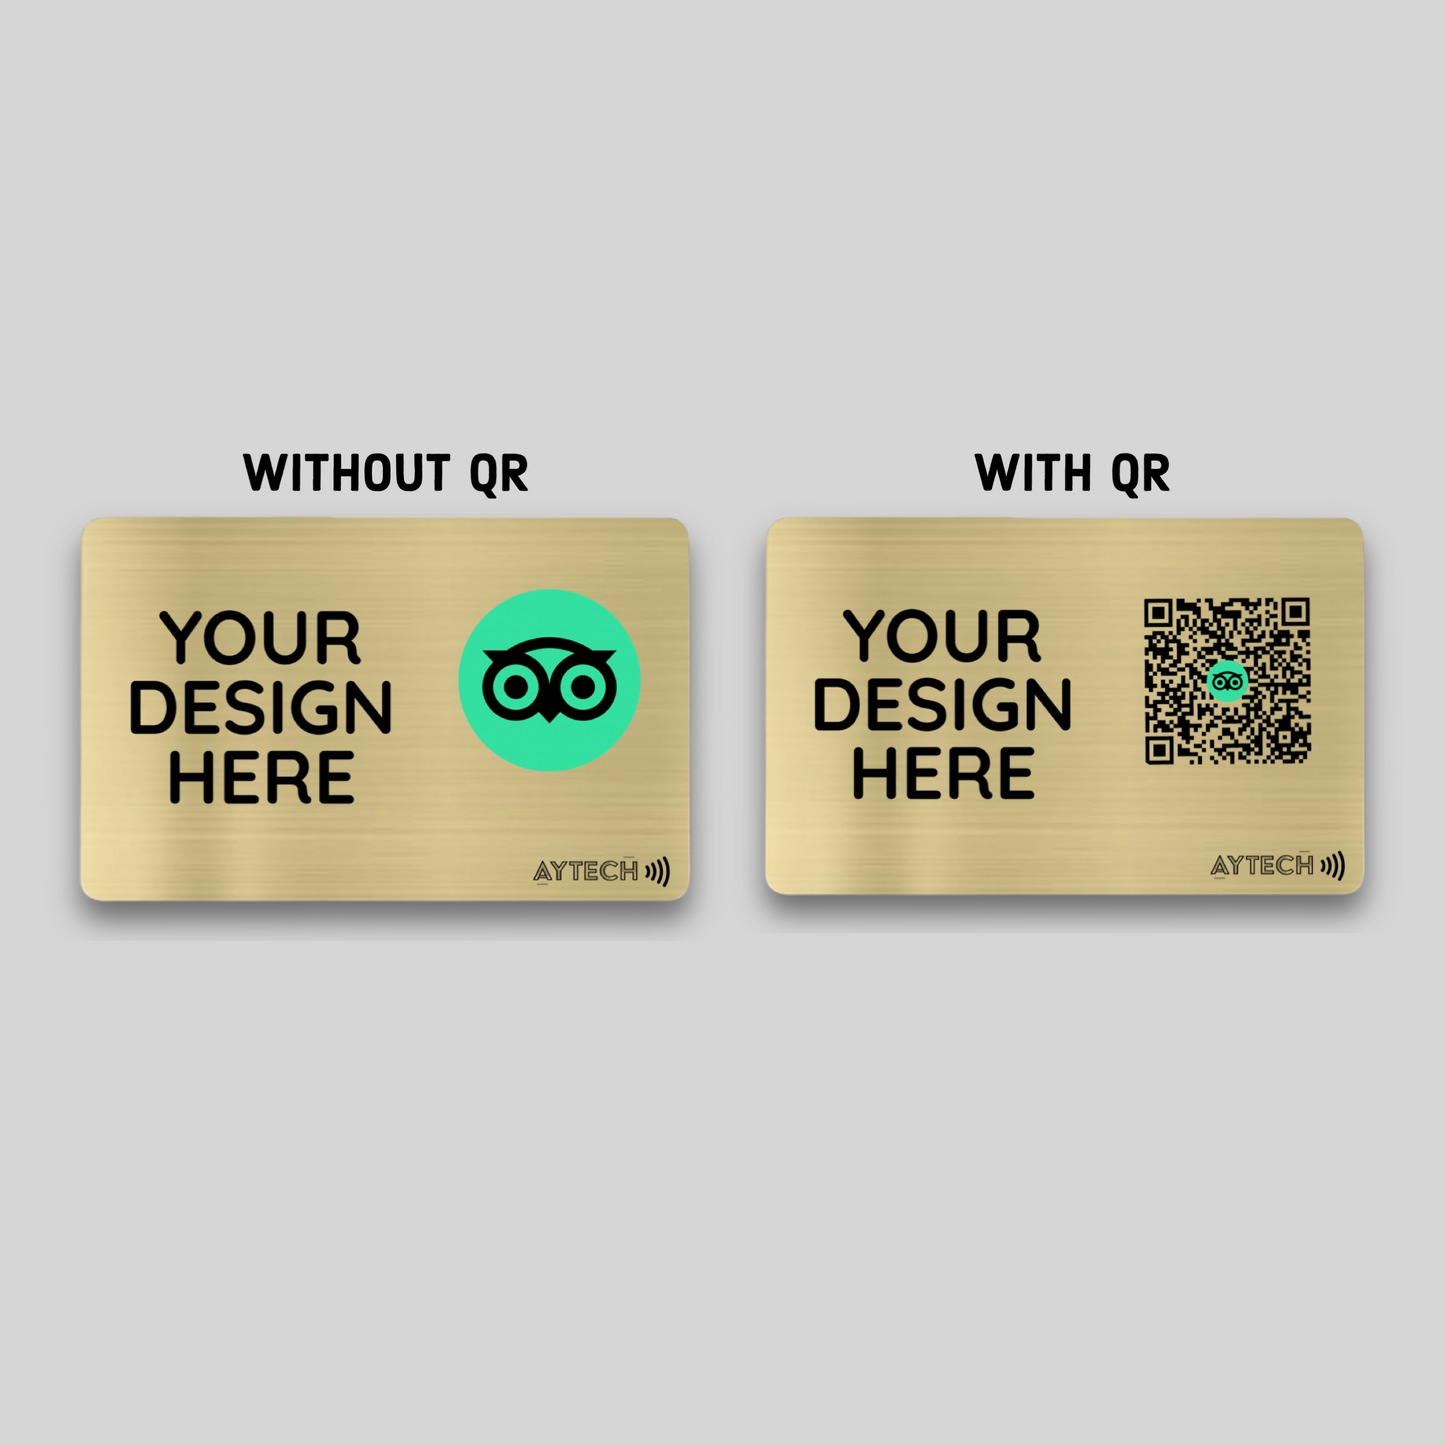 Contactless Review Card - BRUSHED GOLD - AYTECH